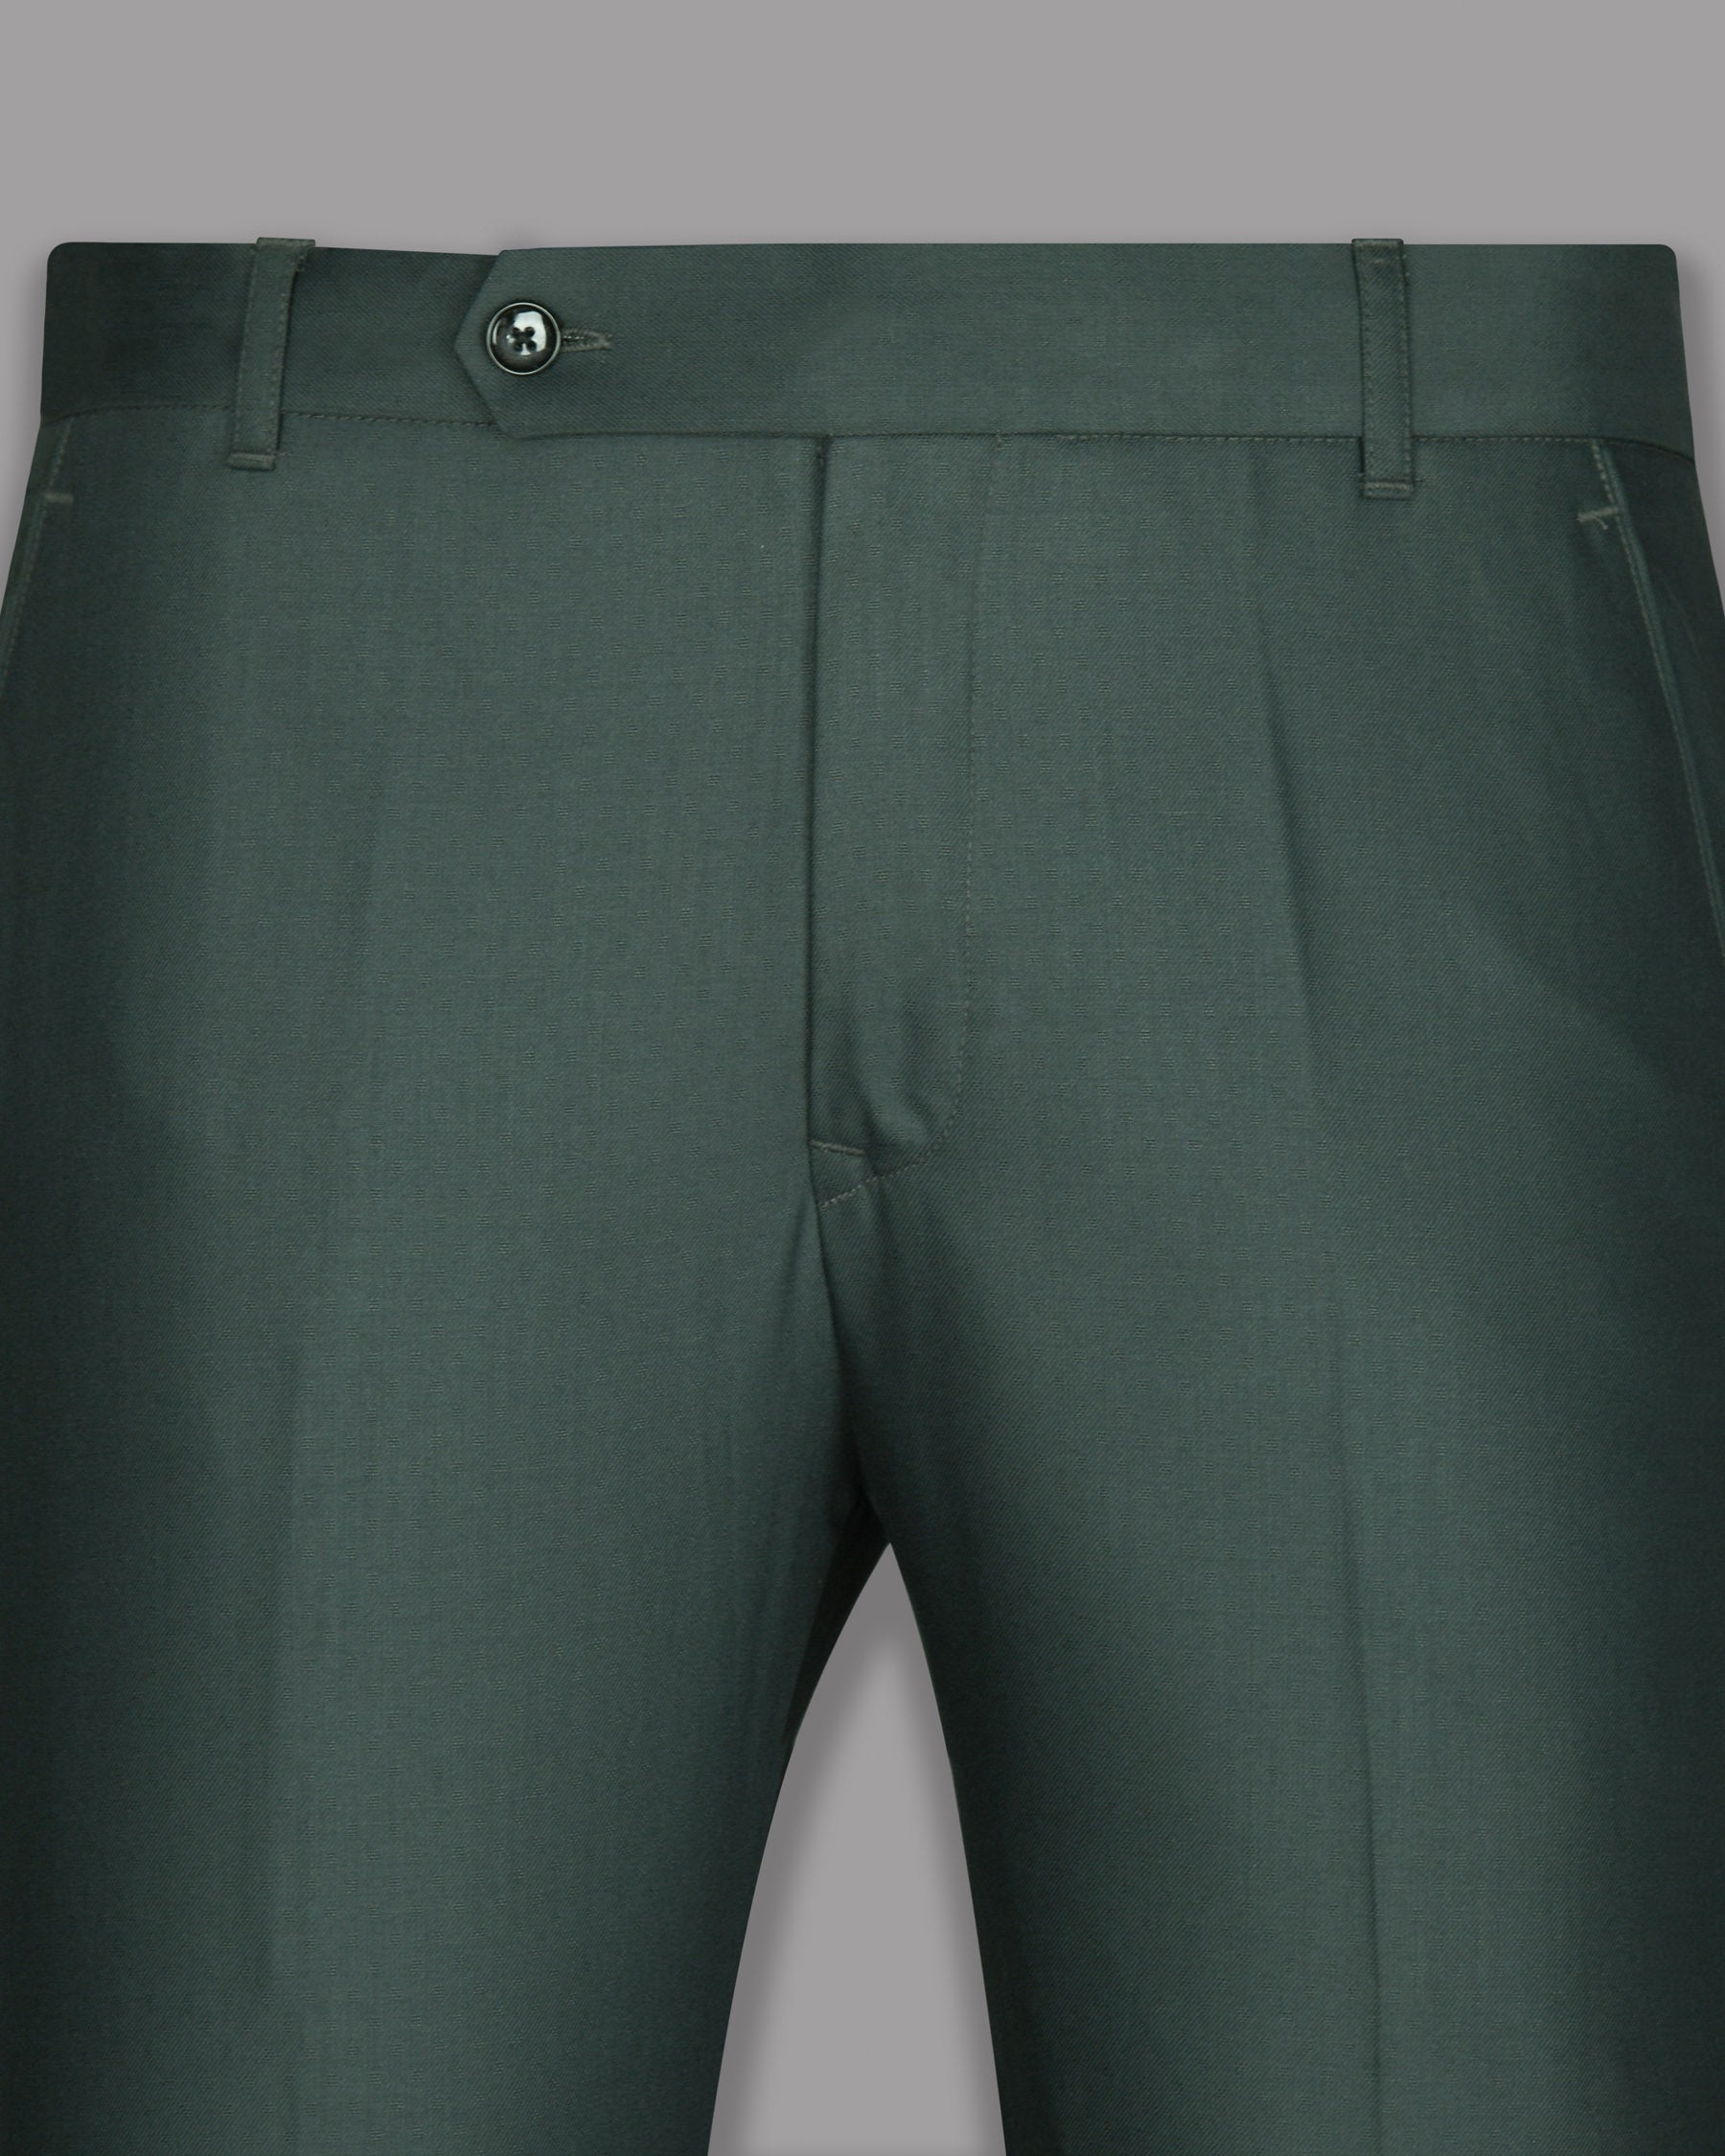 Phthalo Green Micro Dotted Wool Blend Pant T700-32, T700-34, T700-40, T700-36, T700-38, T700-42, T700-28, T700-30, T700-44